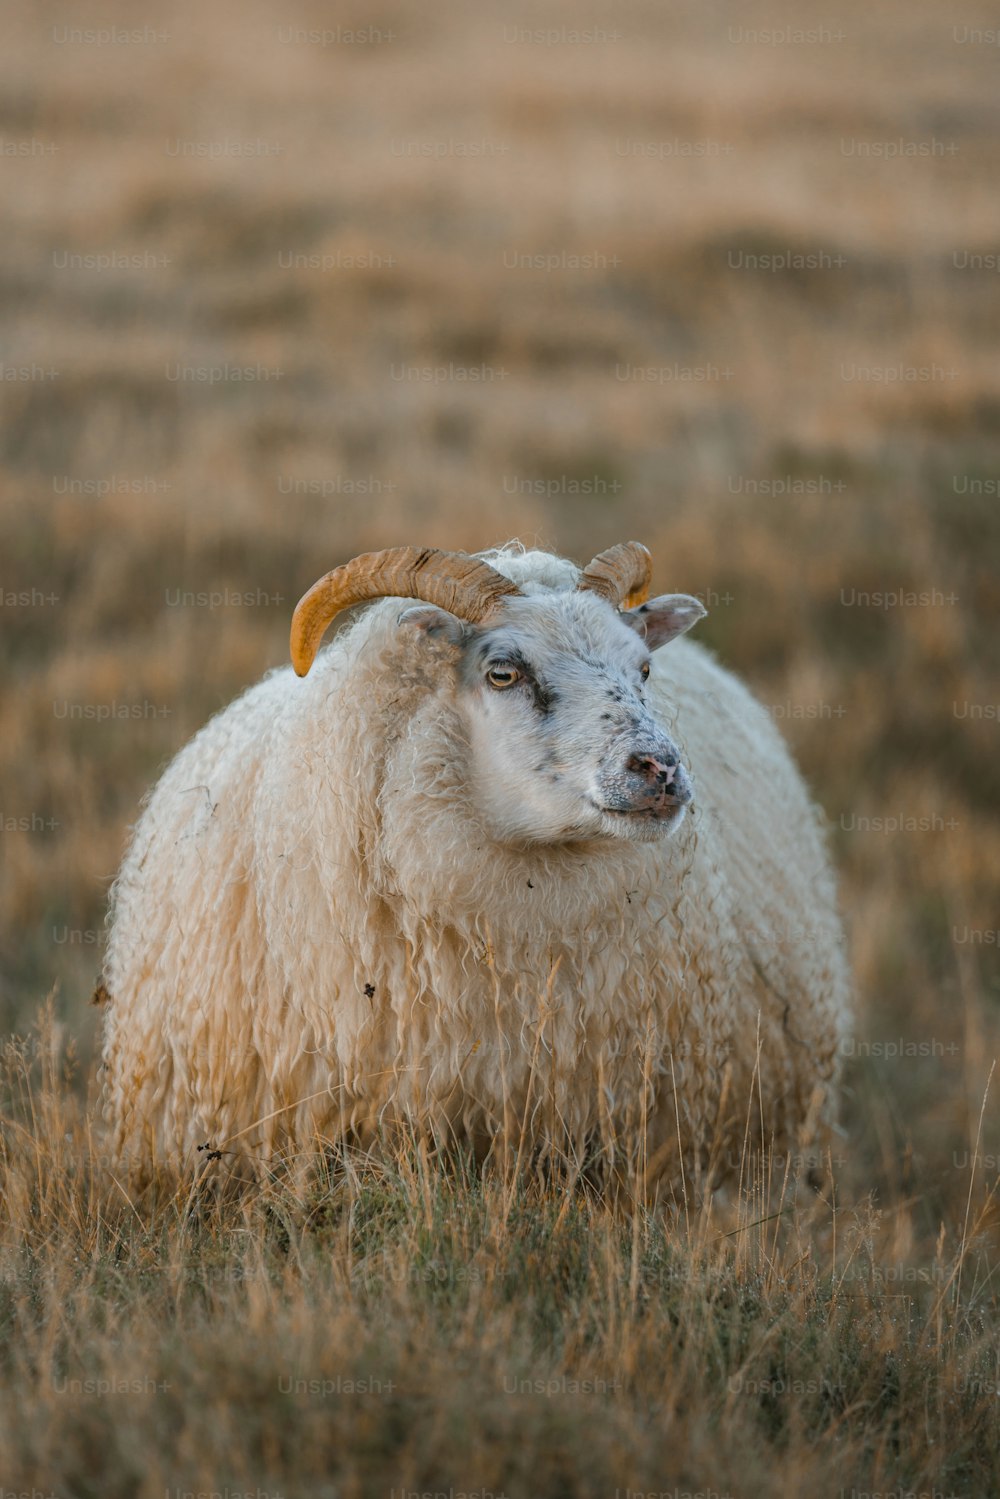 a sheep with horns standing in a field